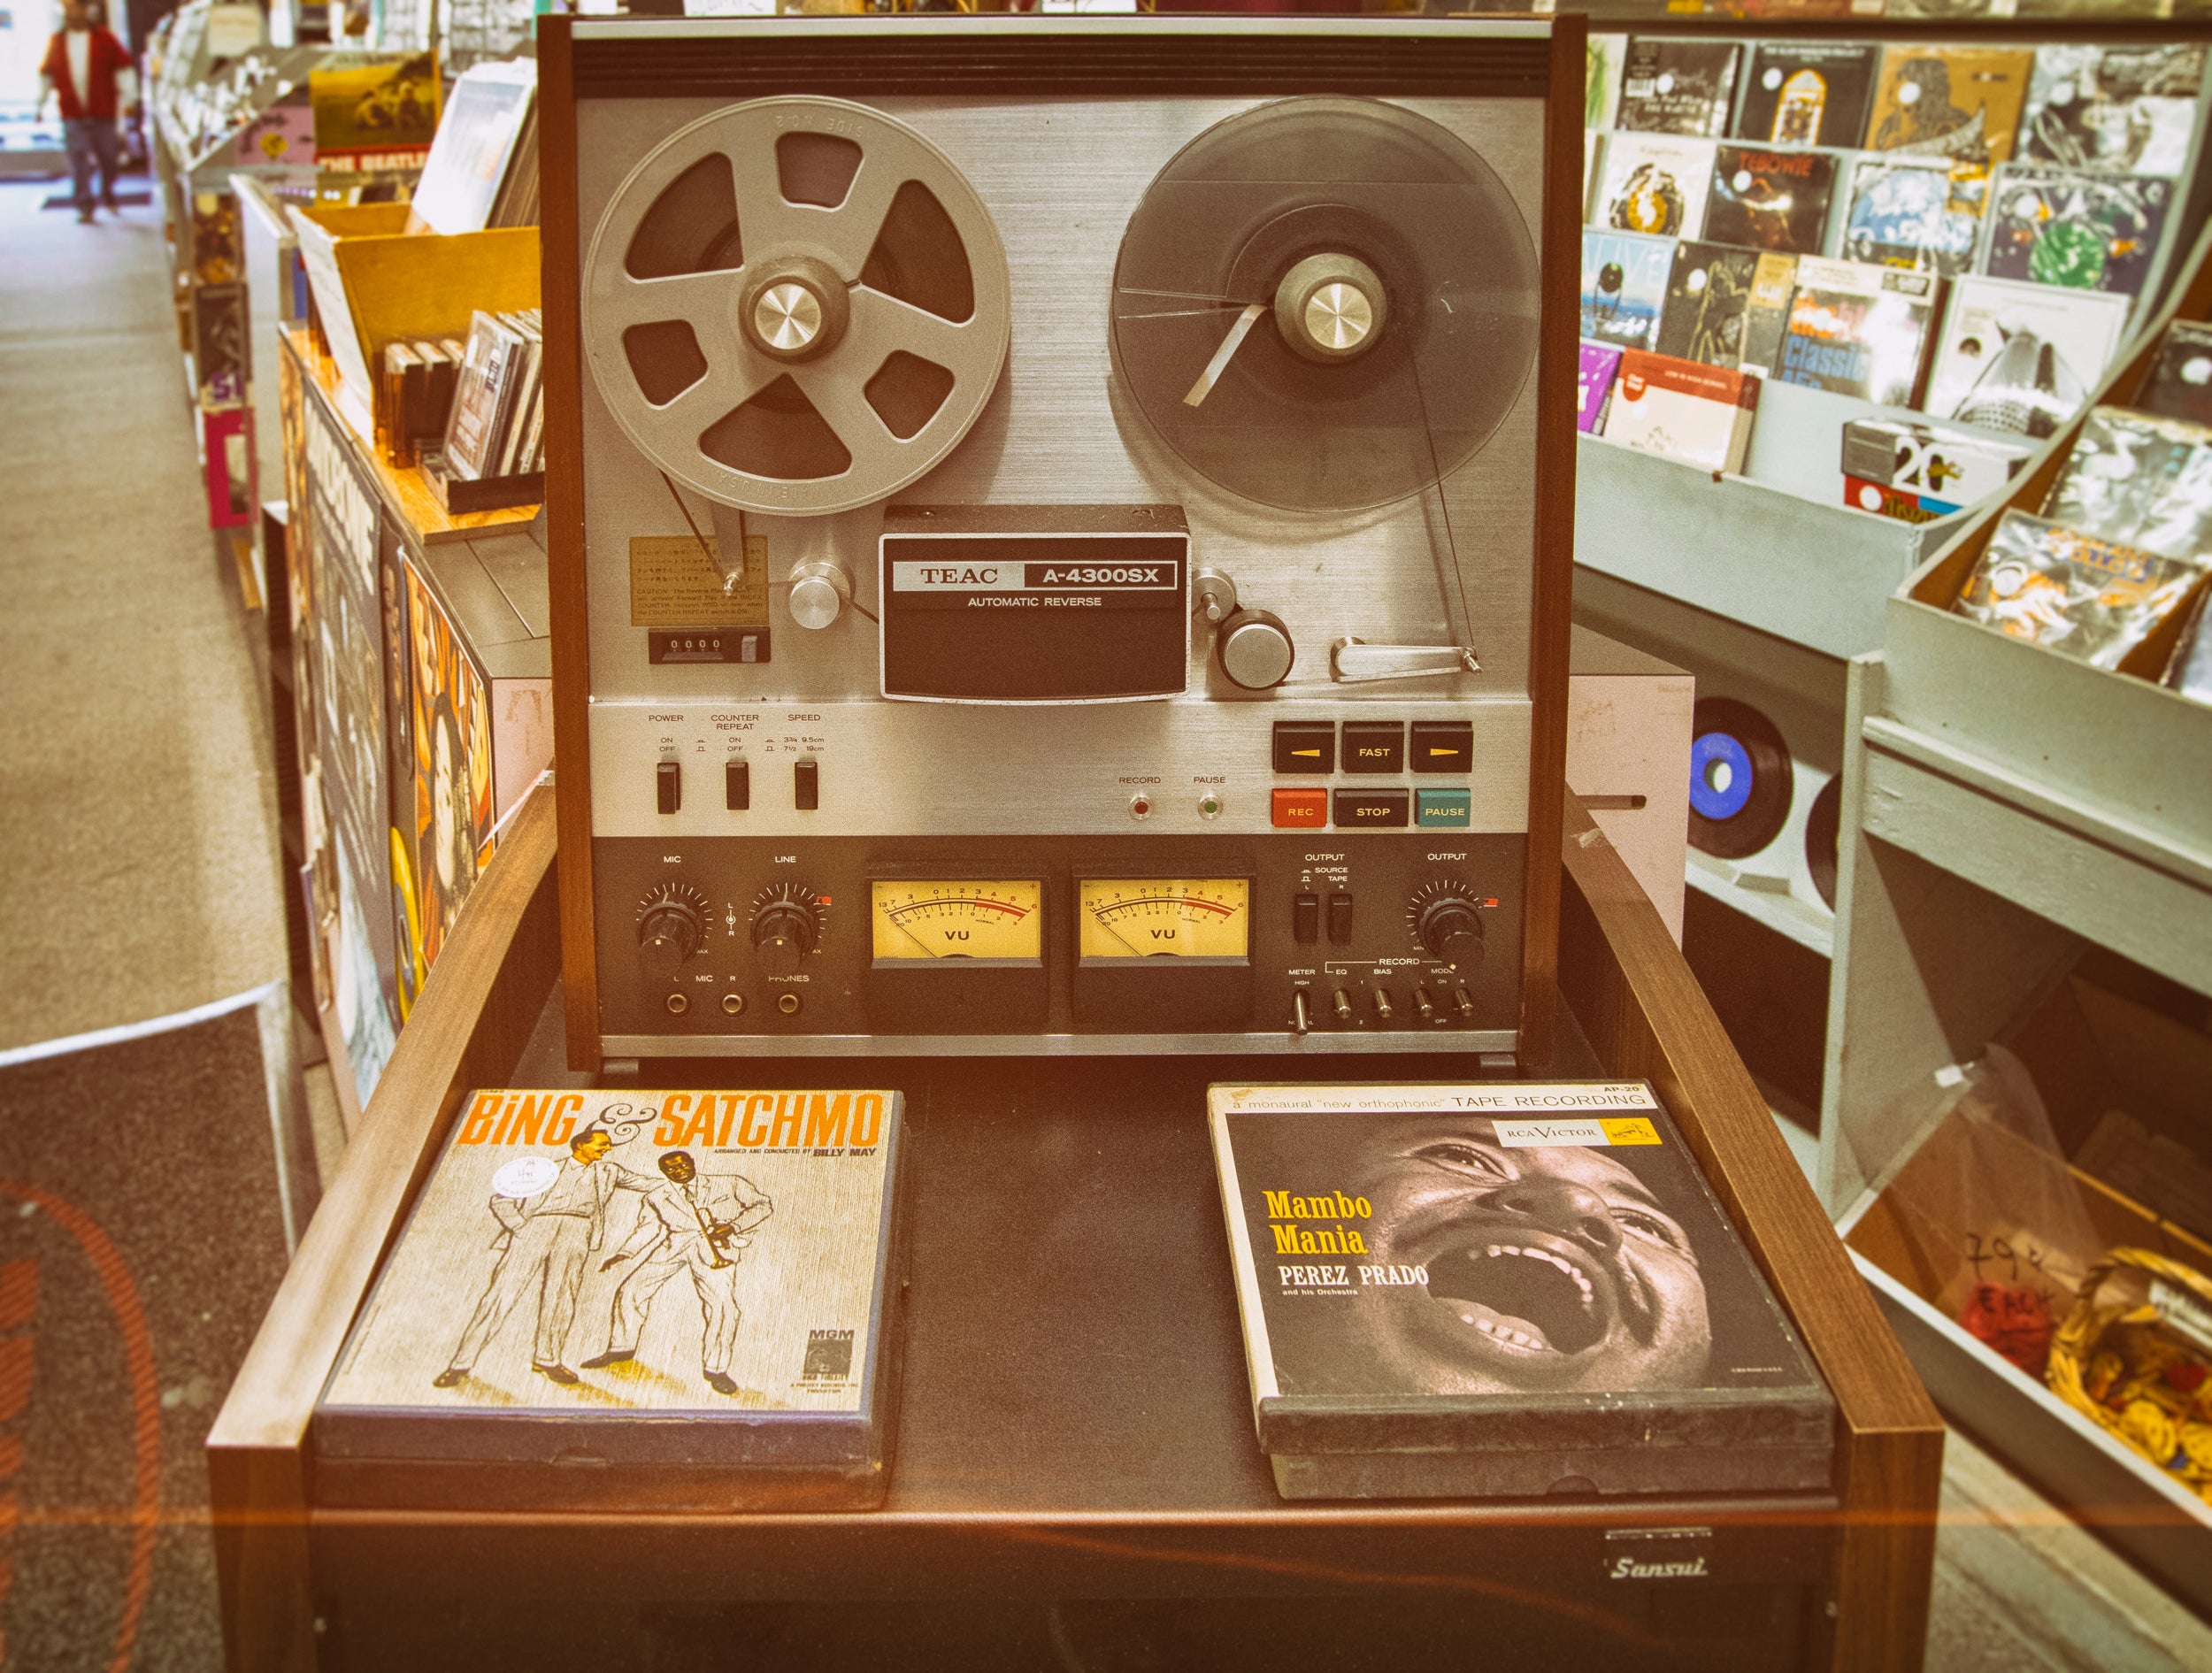 Where To Buy PreRecorded Music on Reel to Reel Tapes RX Reels